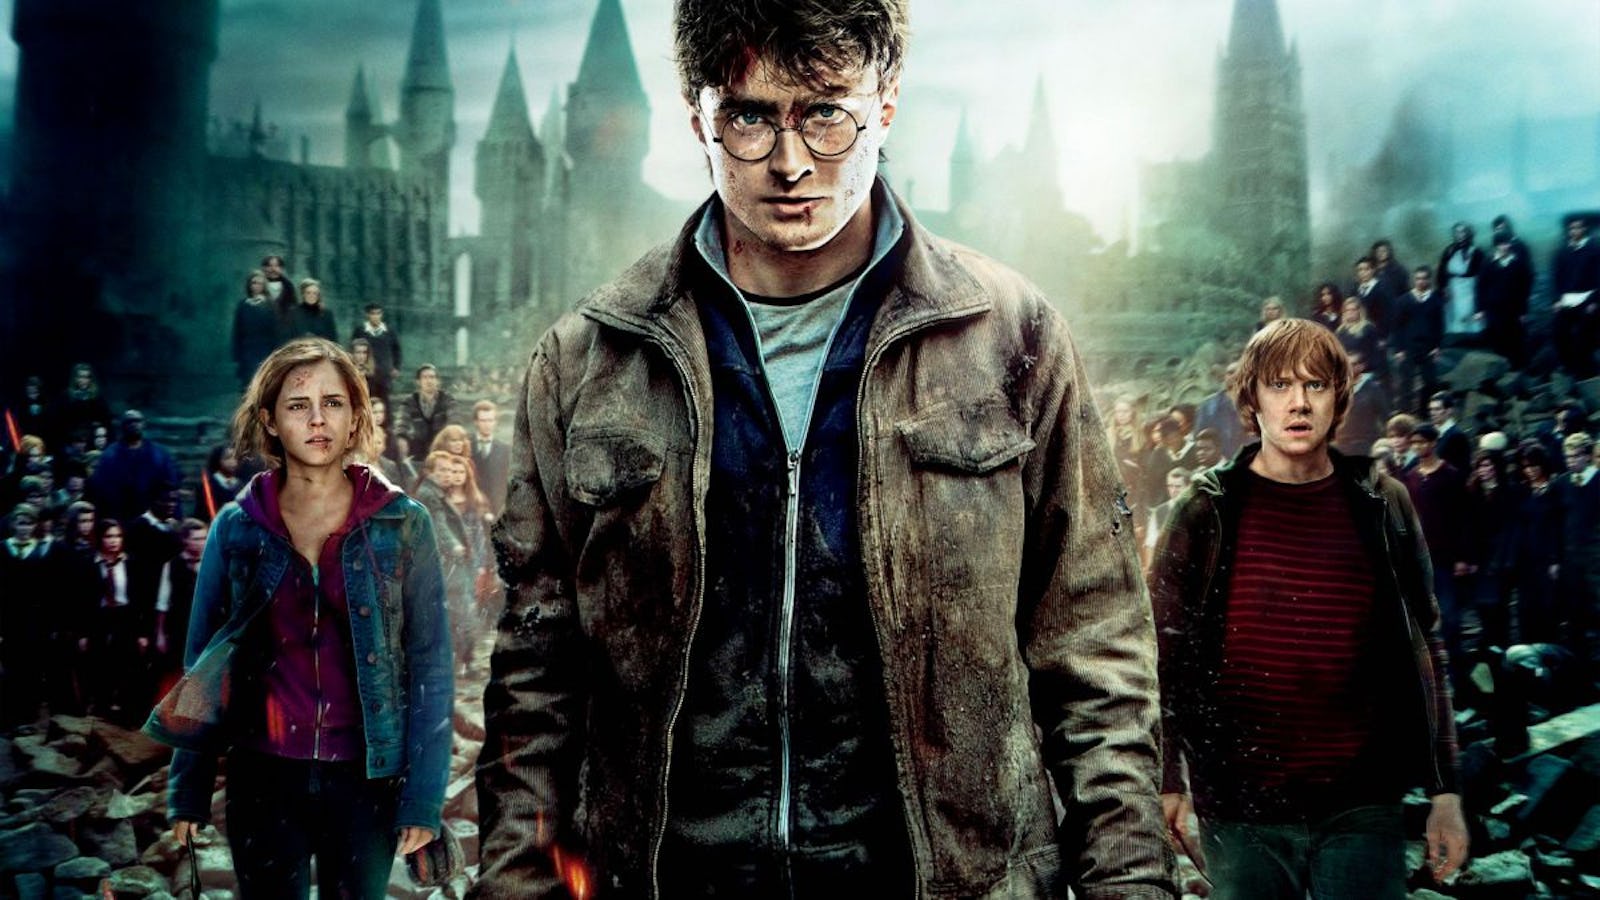 Will There Be Another 'Harry Potter' Movie? J.K. Rowling Has Made Her Position Clear